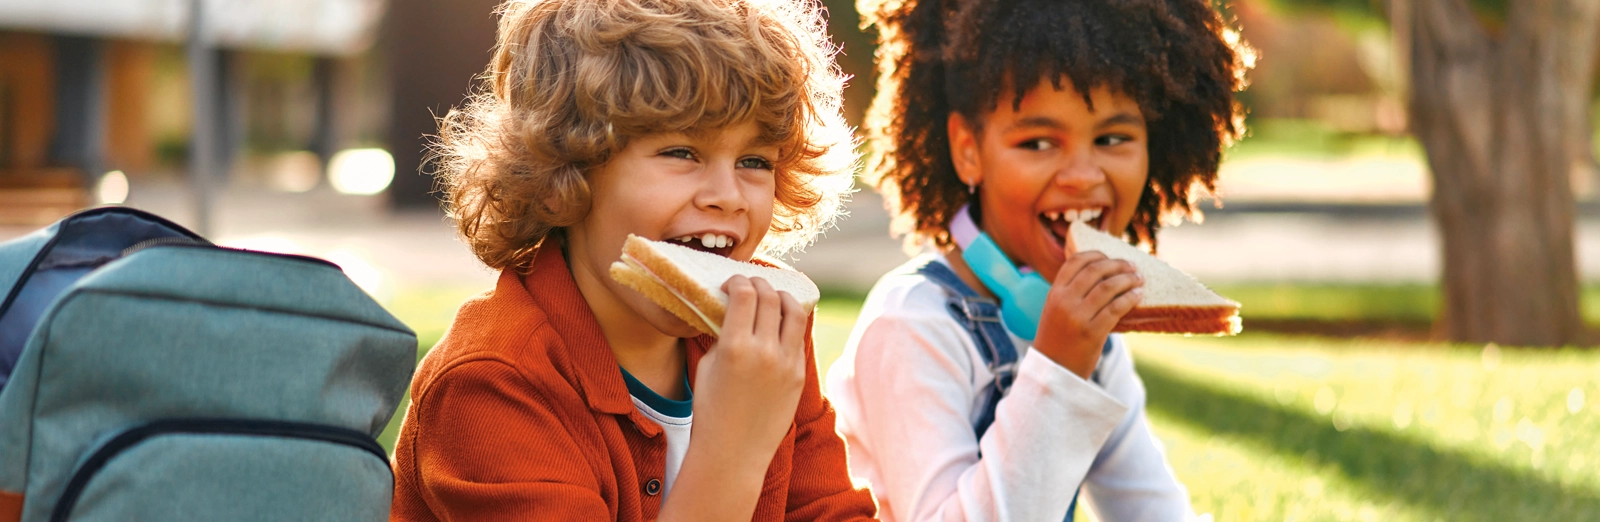 kids-eating-packed-lunches-1600x522-2.webp